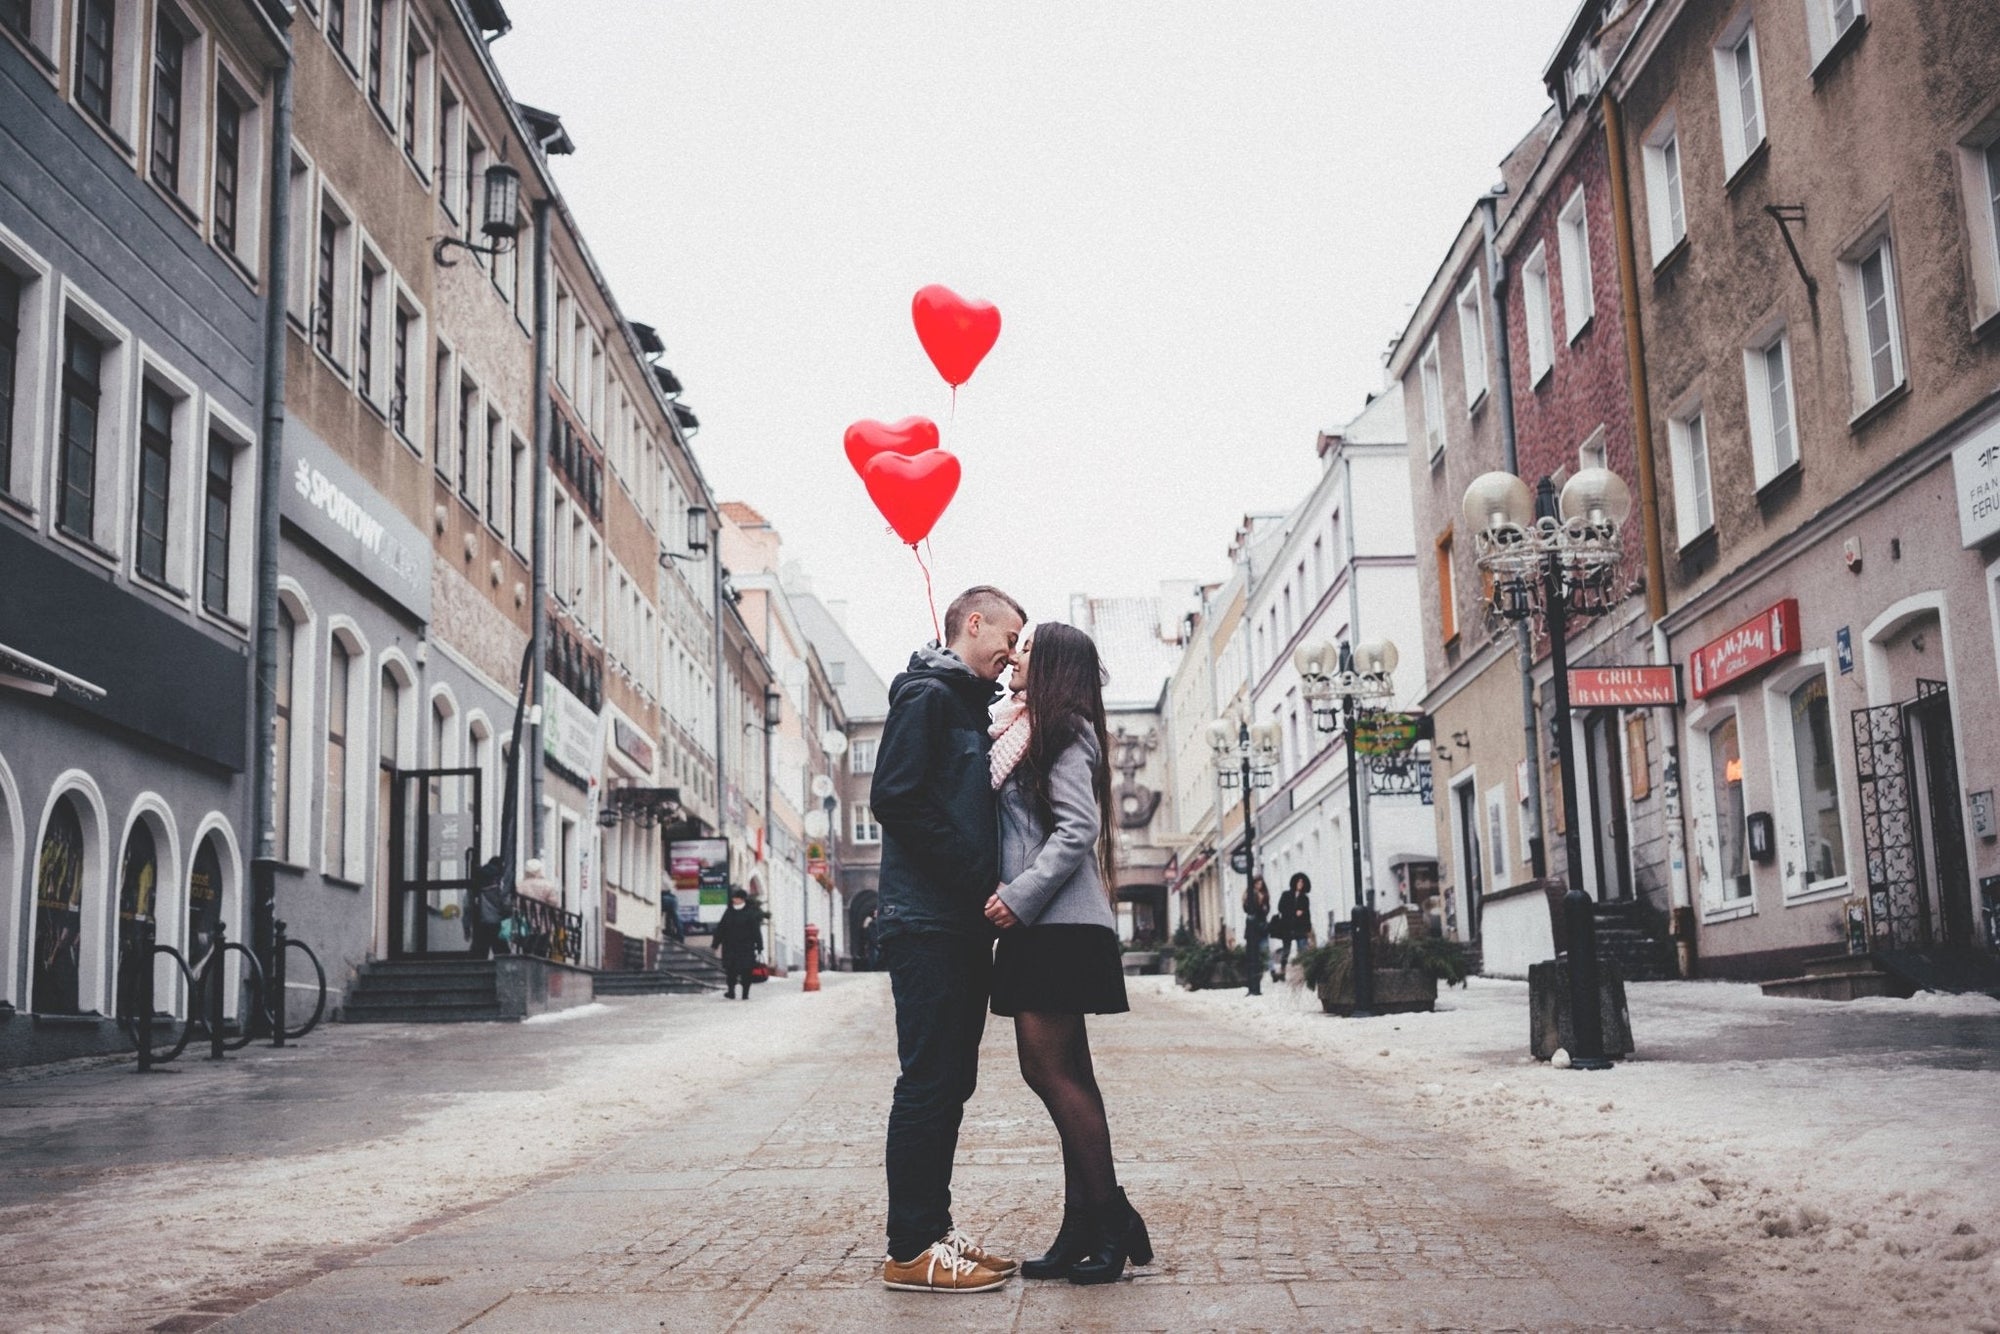 Celebrating tu Amor, Unique Couples Traditions you Can Start to Keep your Relationship Strong - Mi LegaSi